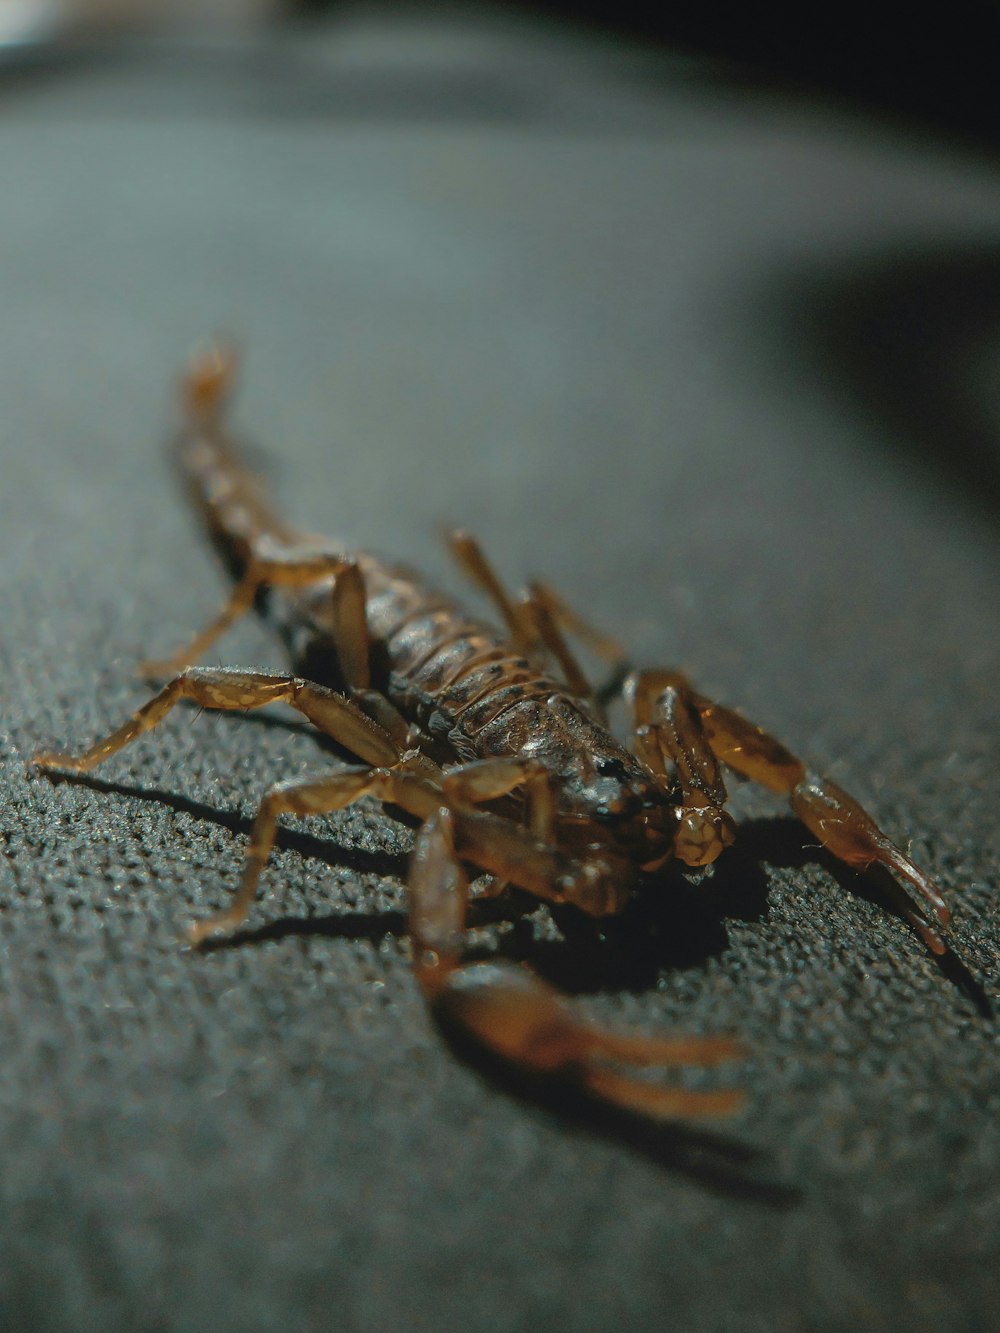 a close up of a scorpion on a table